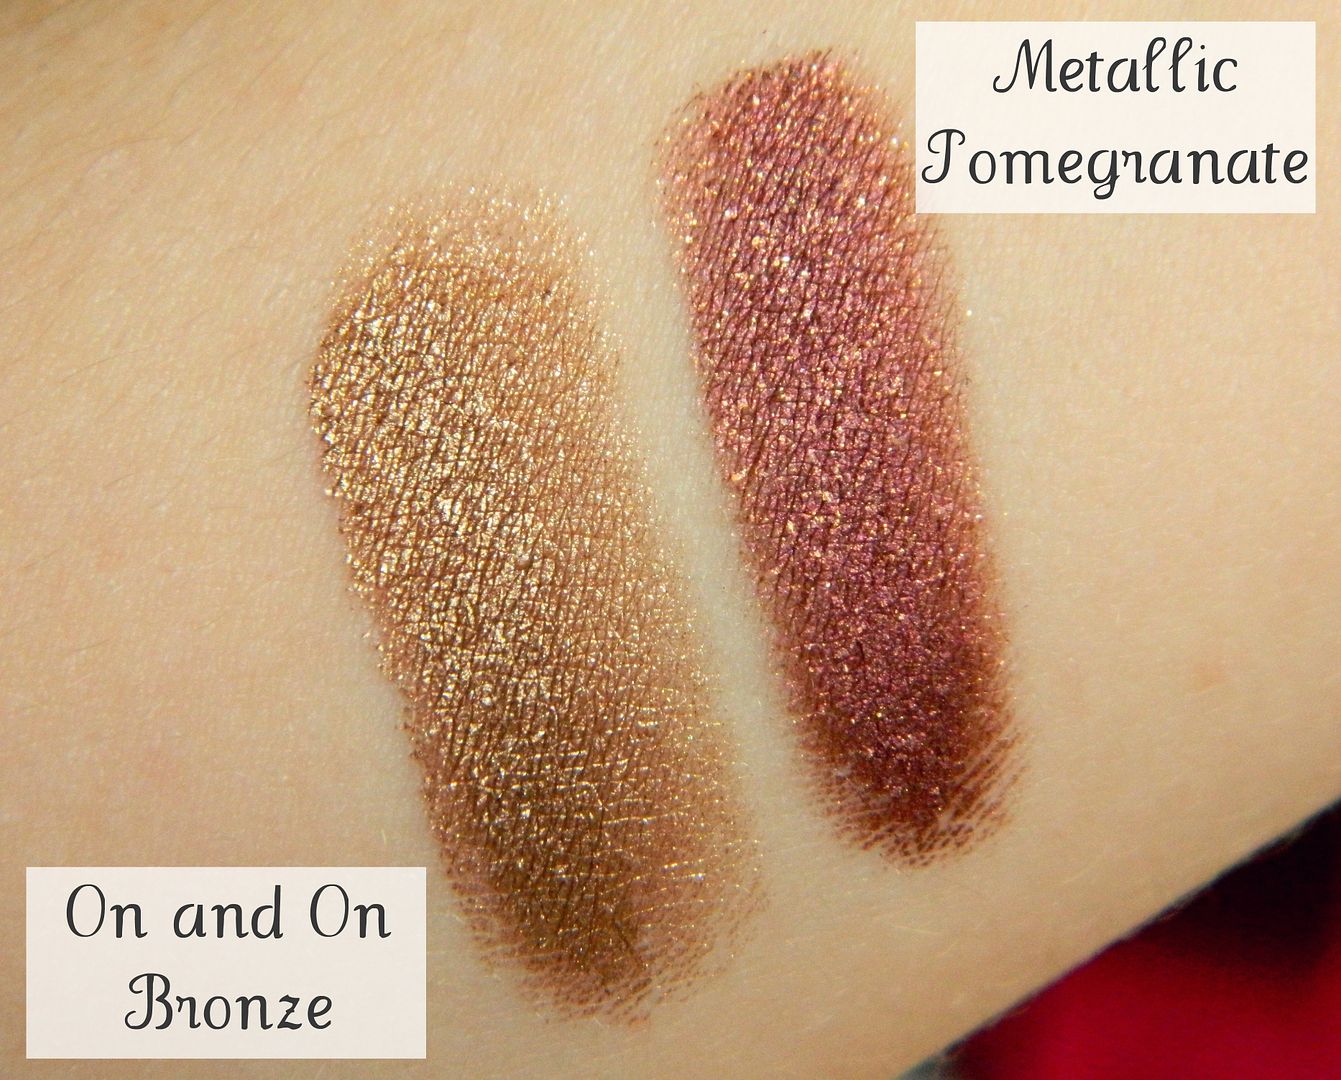 Maybelline Color Colour Tattoo 24 Hours Cream Eye Shadow Review On And On Bronze Metallic Pomegranate Swatch Belle-amie UK Beauty Fashion Lifestyle Blog